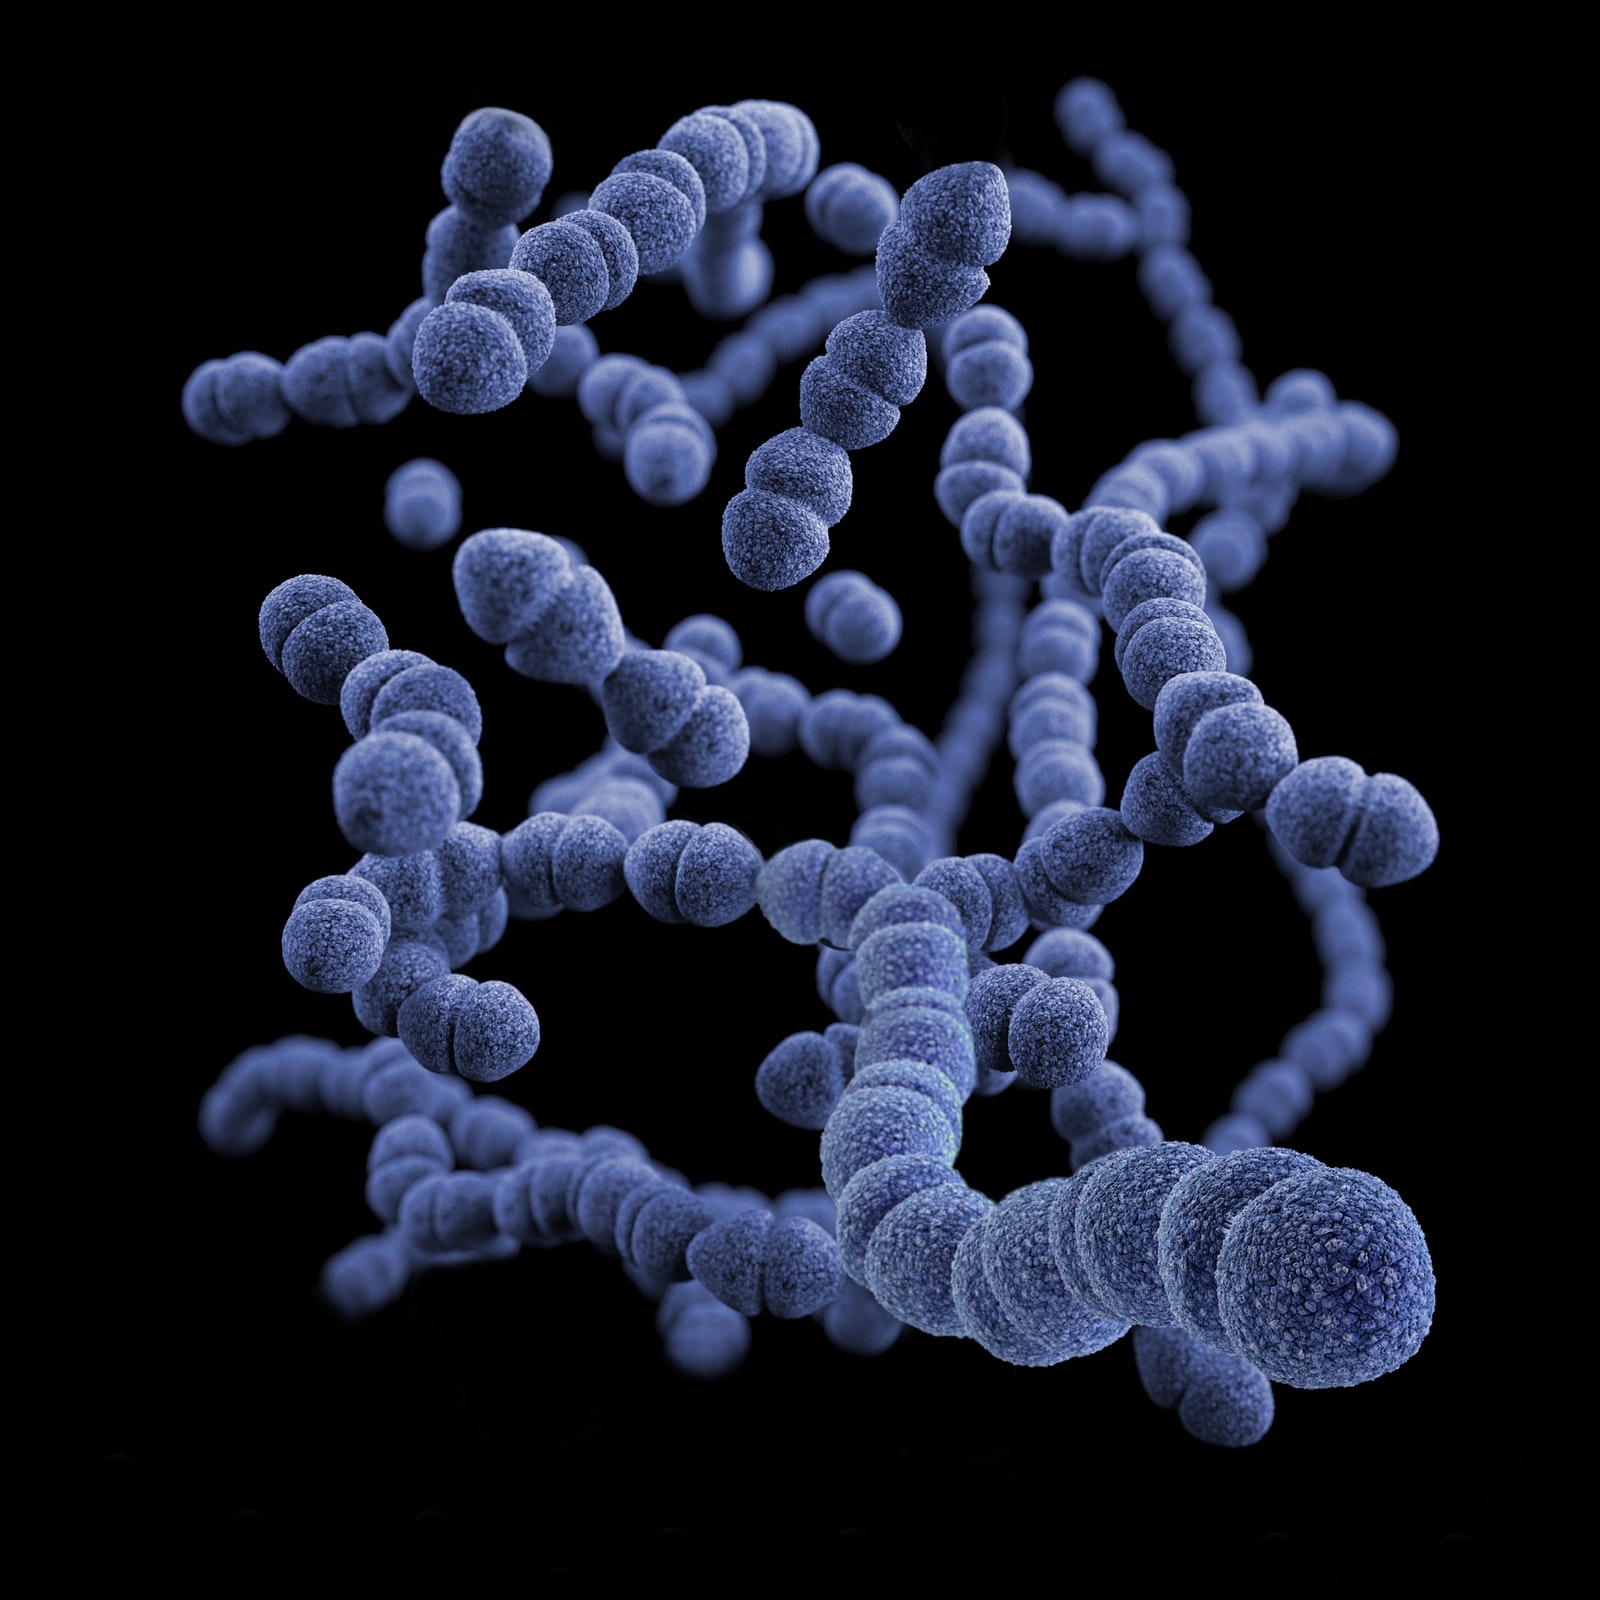 An image of streptococcus bacteria.